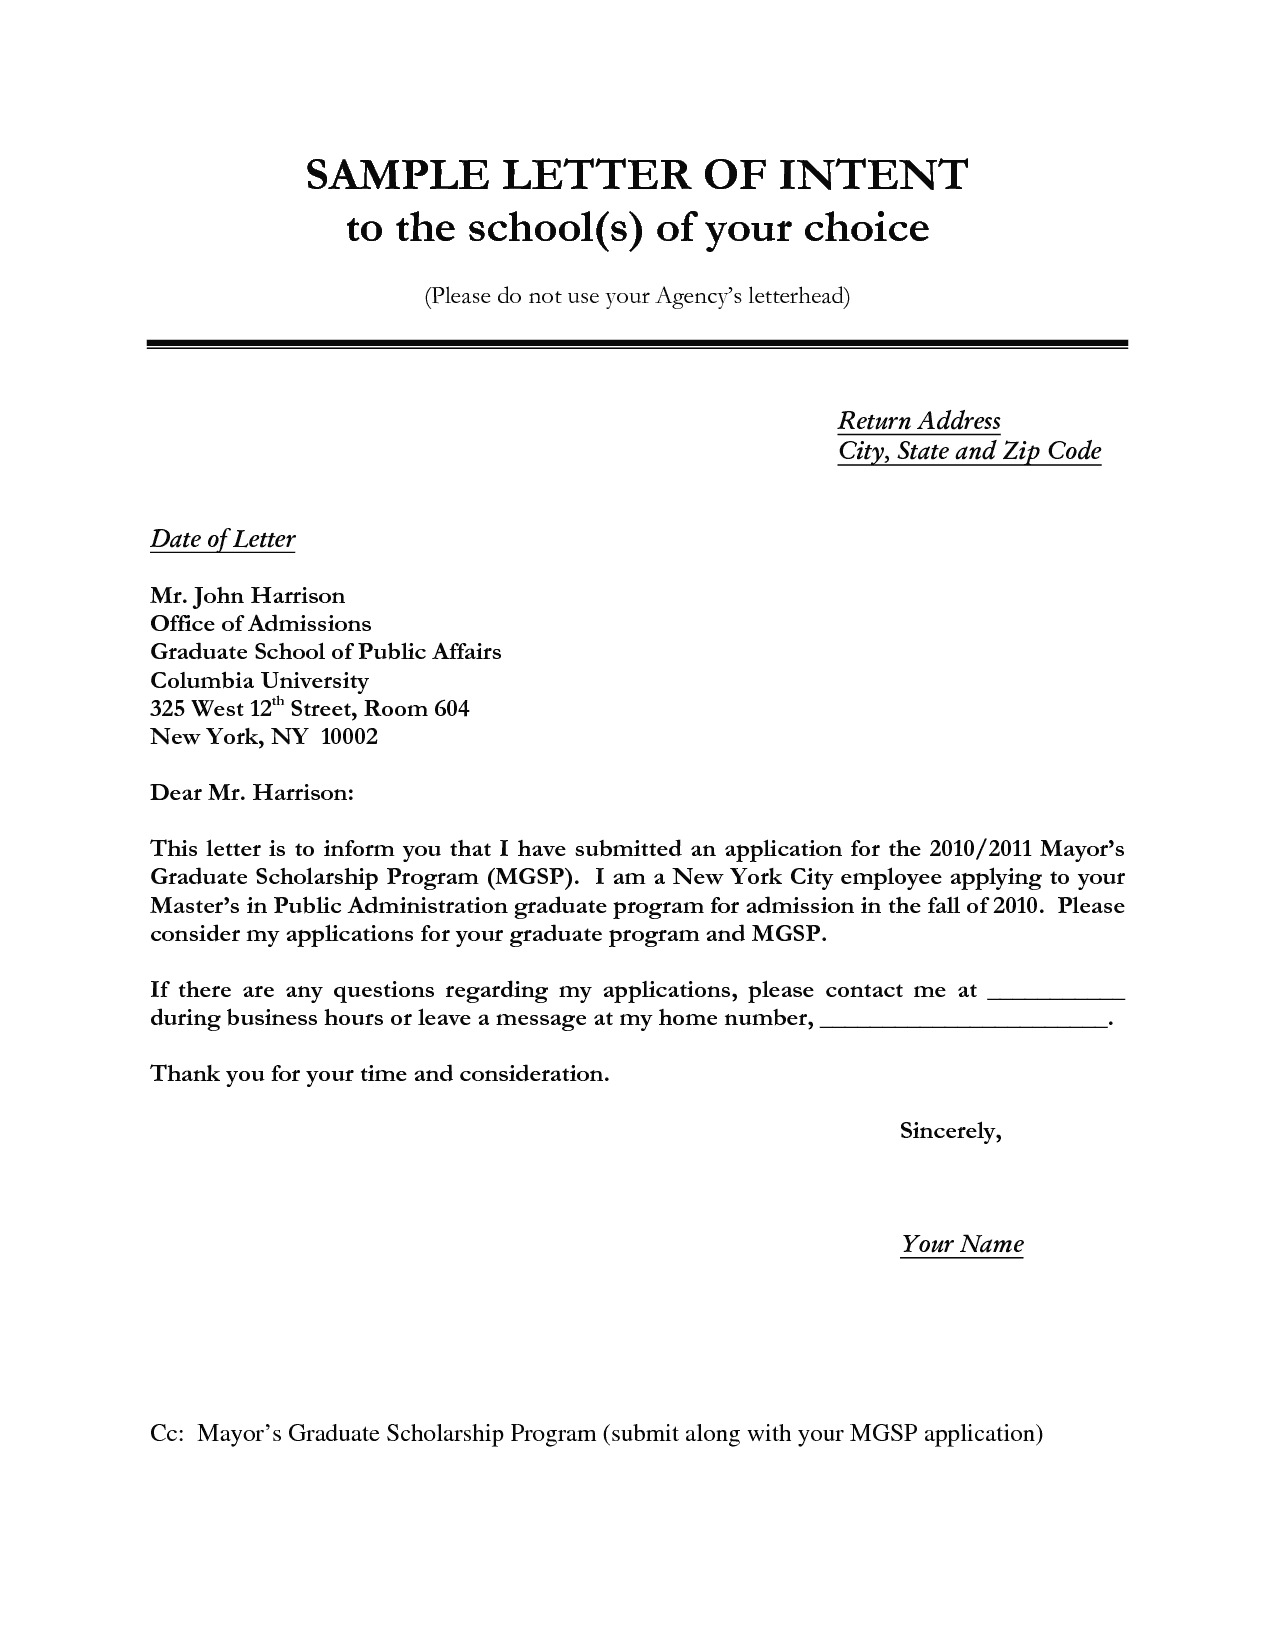 sample letter of intent 05